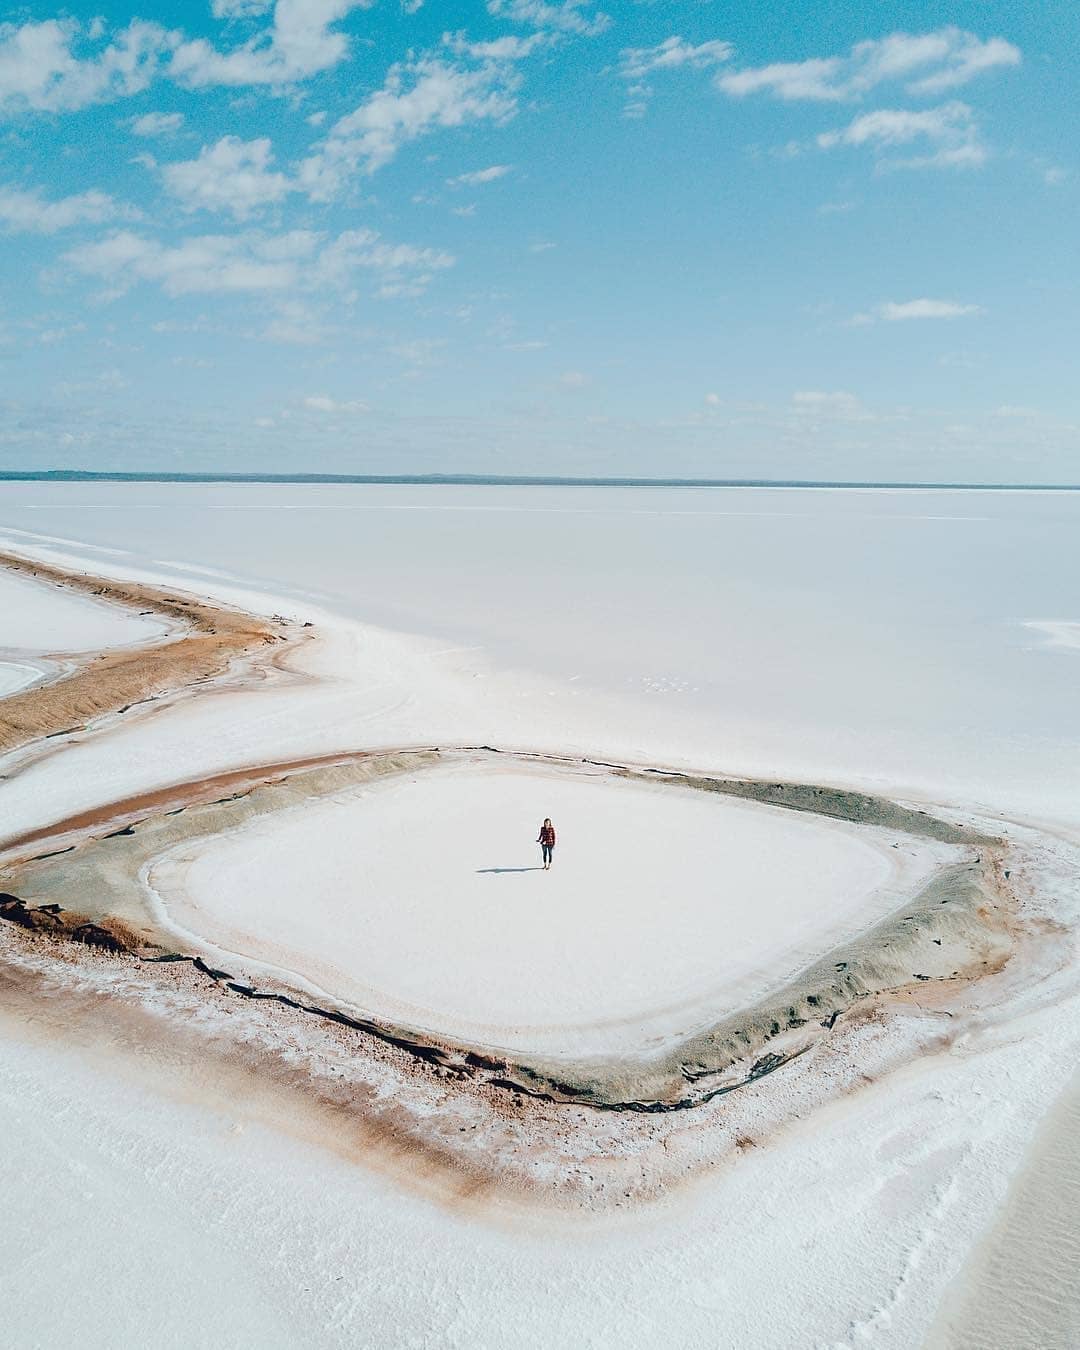 🔷@Regran_ed from @australiasgoldenoutback -  When you visit Lake Lefroy you almost feel like you're on the moon 🌝 This giant lake has a clay pan base covered in a salt crust, making it seem like endless plains of the magical white surface. One of the perfect spots in the Goldfields region for drone photography as it looks sensational from above 📸 📷 @wrenees 📍 Lake Lefroy, Kambalda, in the Goldfields region of @WesternAustralia @Australia - #westernaustralia